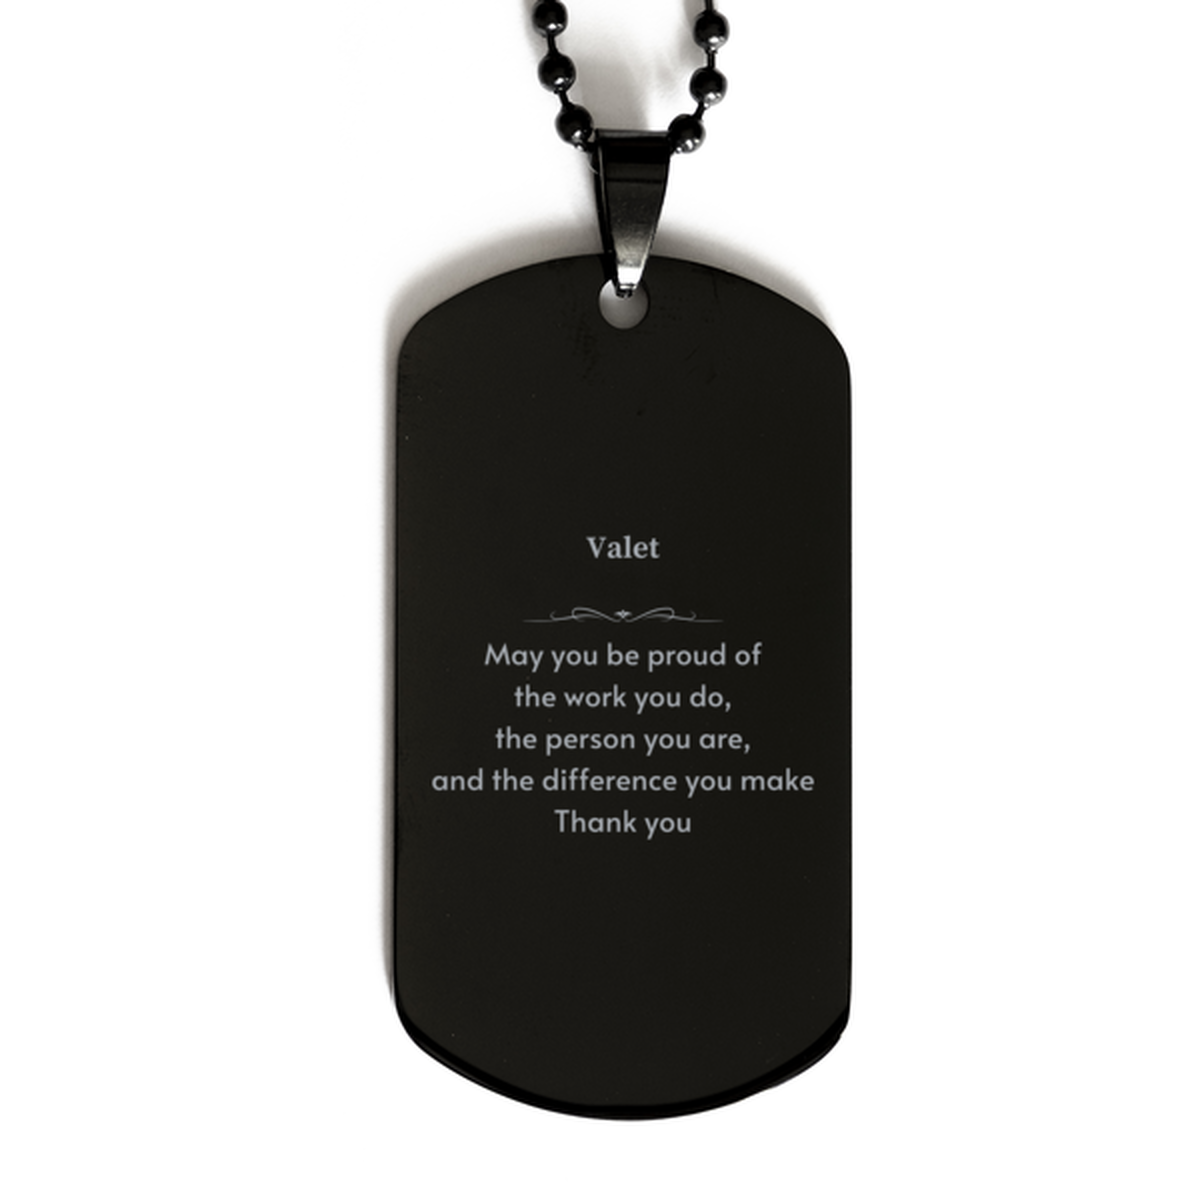 Heartwarming Black Dog Tag Retirement Coworkers Gifts for Valet, Valet May You be proud of the work you do, the person you are Gifts for Boss Men Women Friends